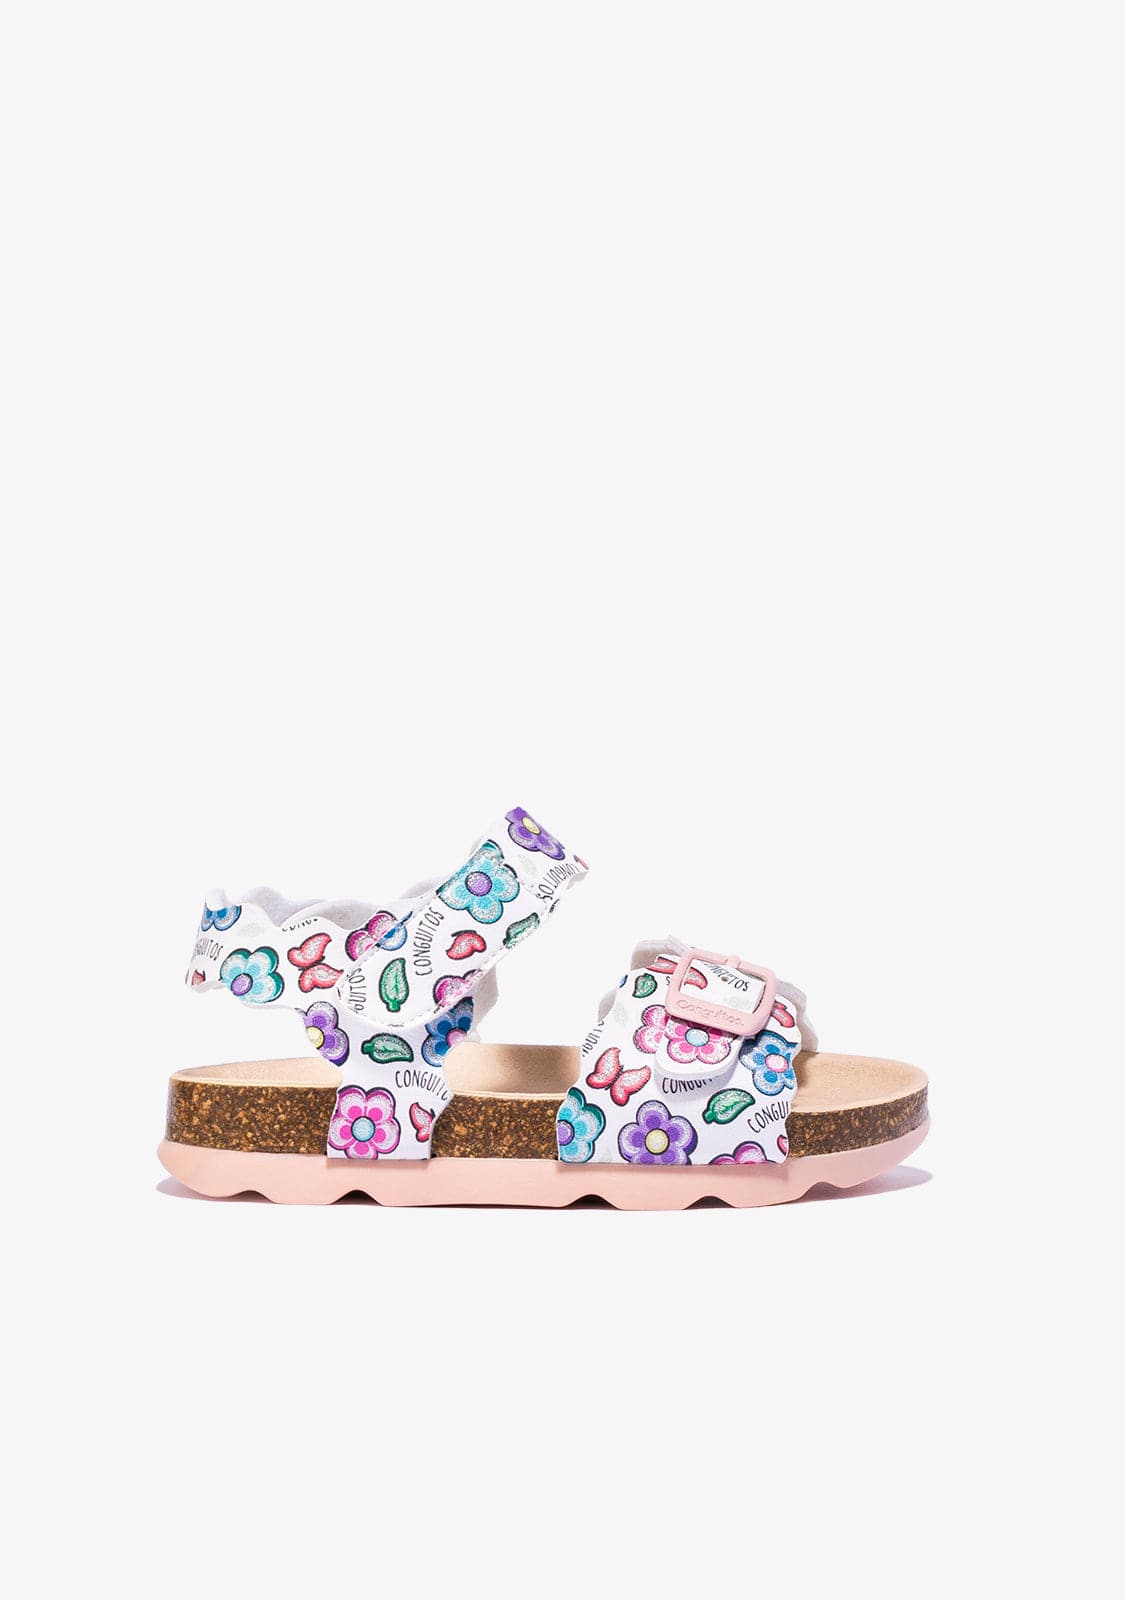 CONGUITOS Shoes Girl's White Bio Flowers Sandals